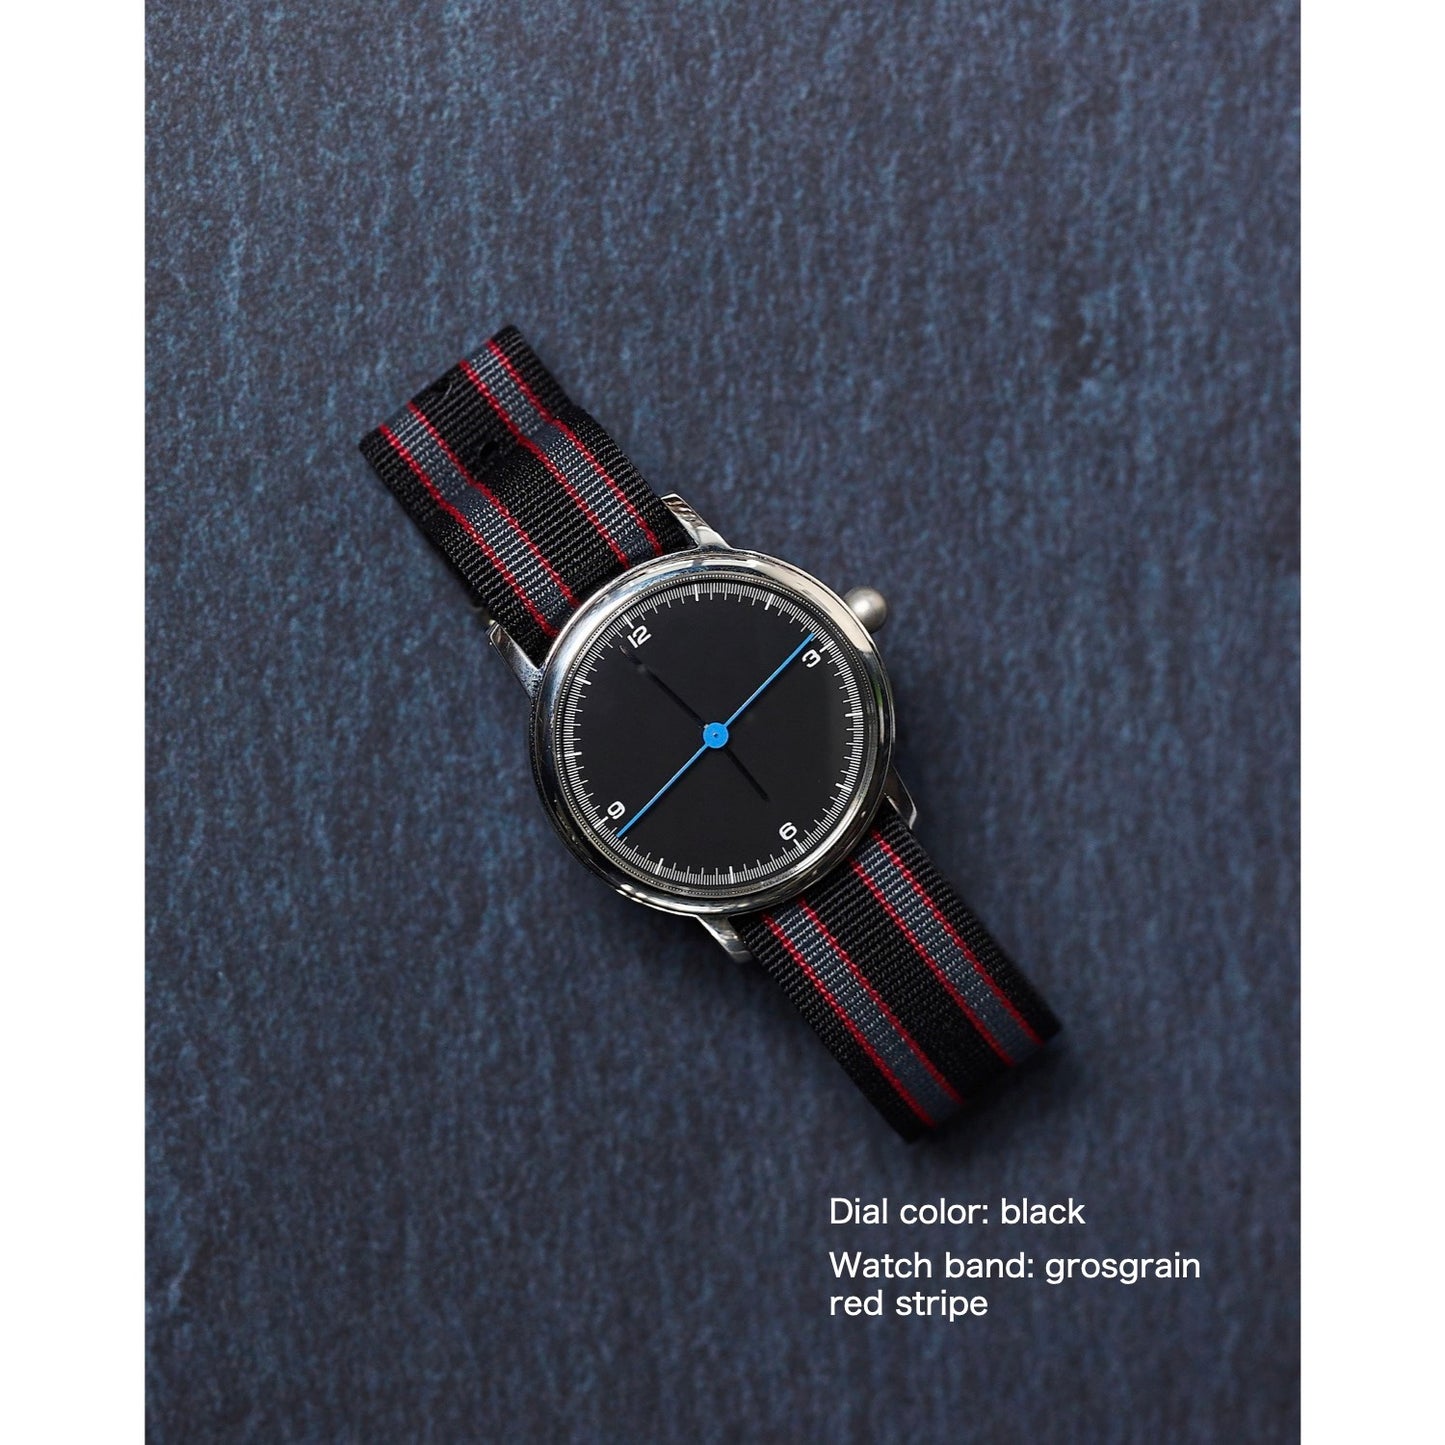 Dial color: black / watch band: grosgrain red stripe